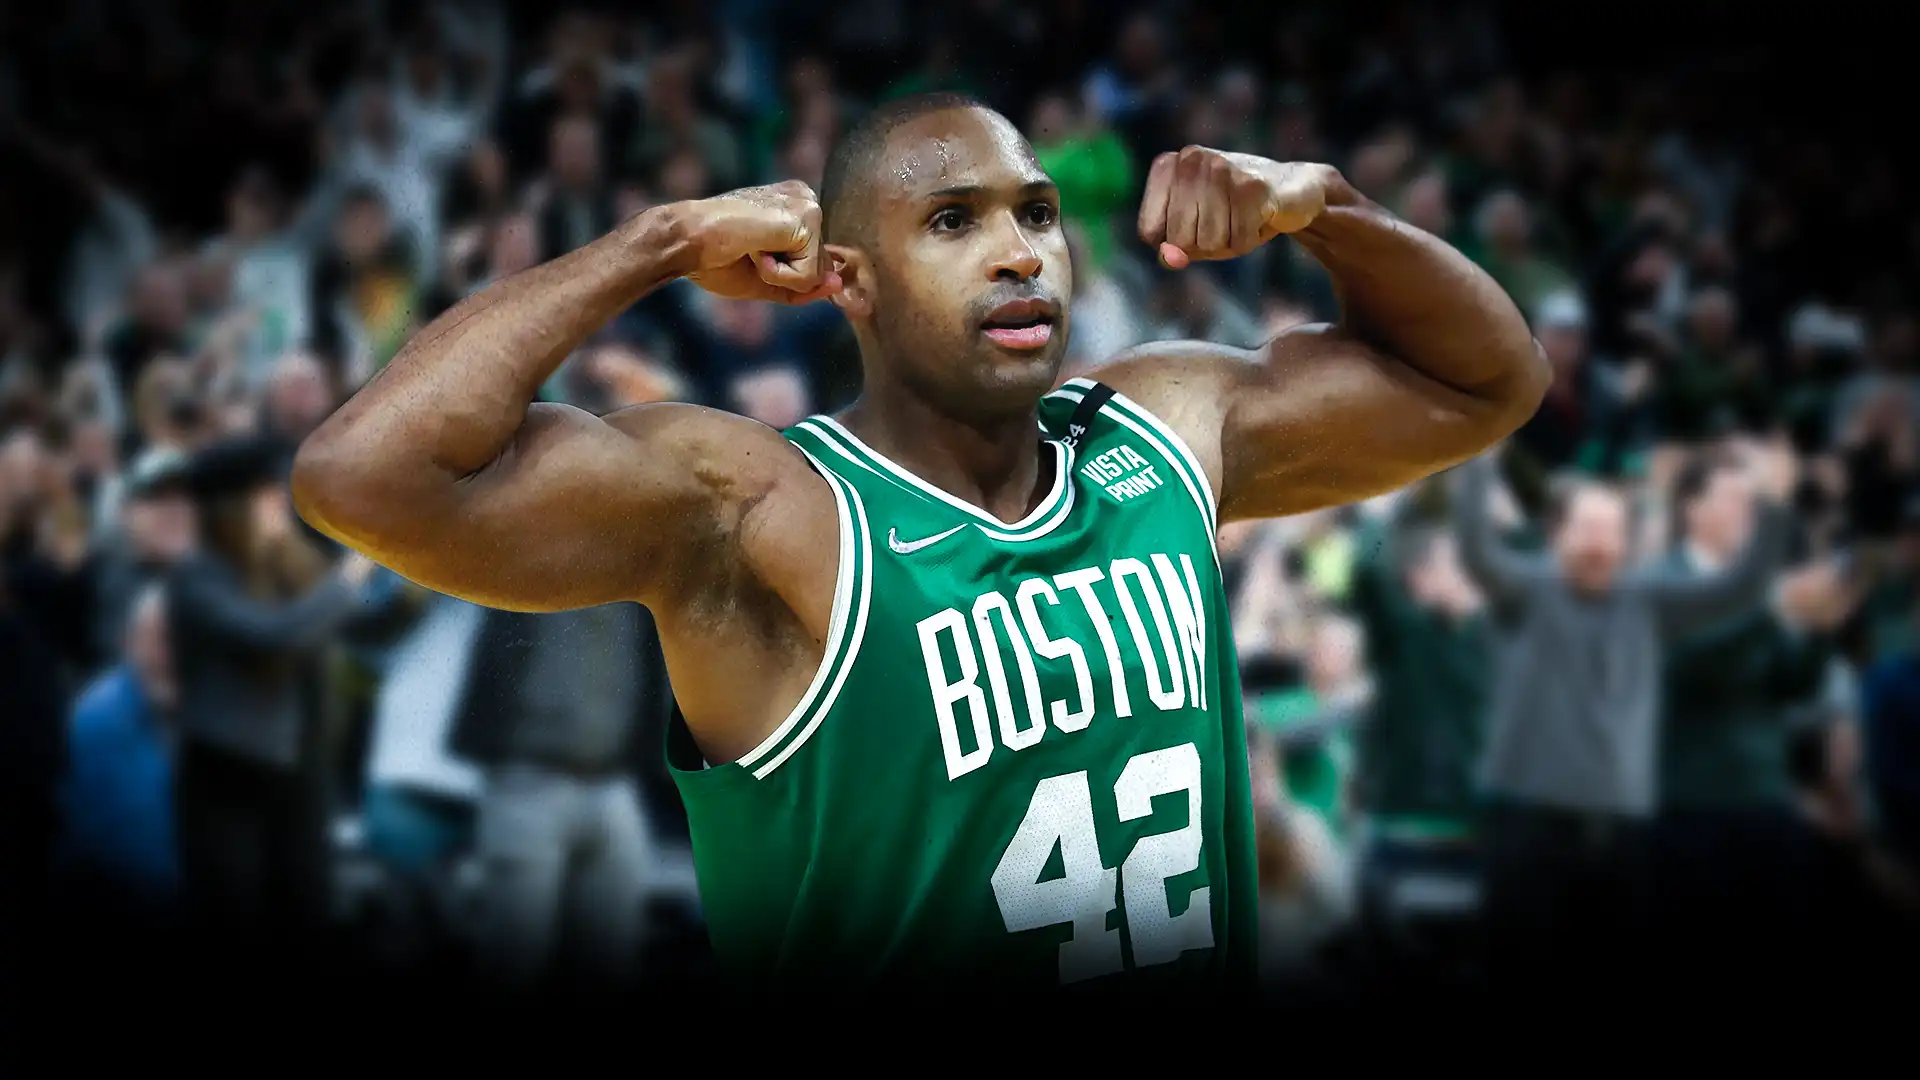 Al Horford Game 1 of the NBA Finals